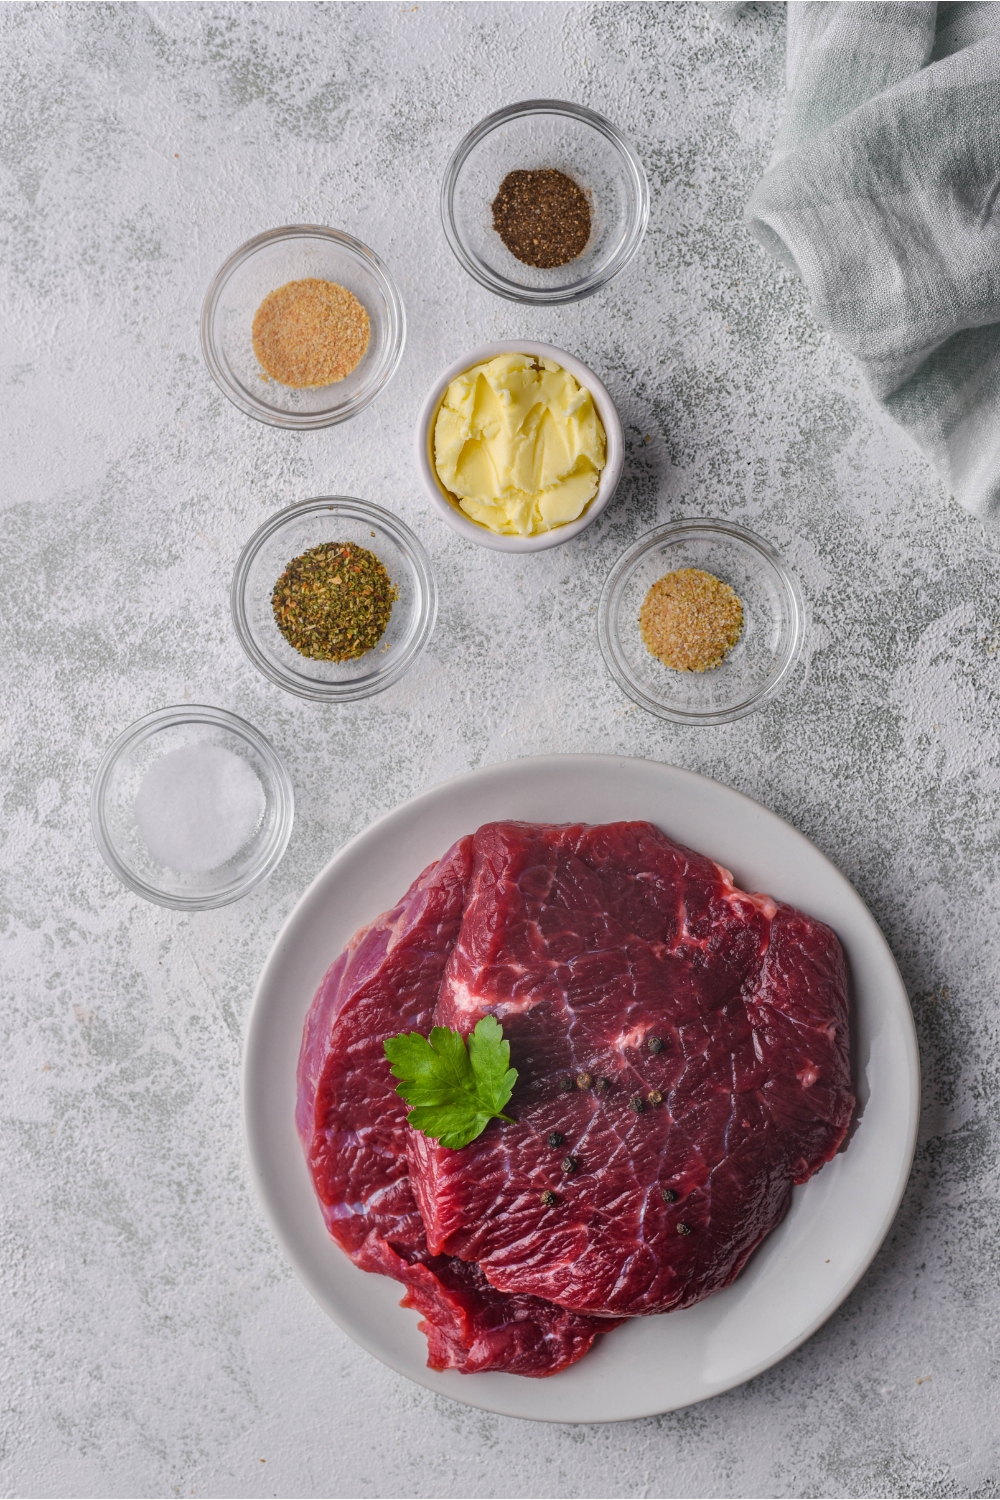 An assortment of ingredients including a plate of raw flat iron steak and bowls of spices and butter.